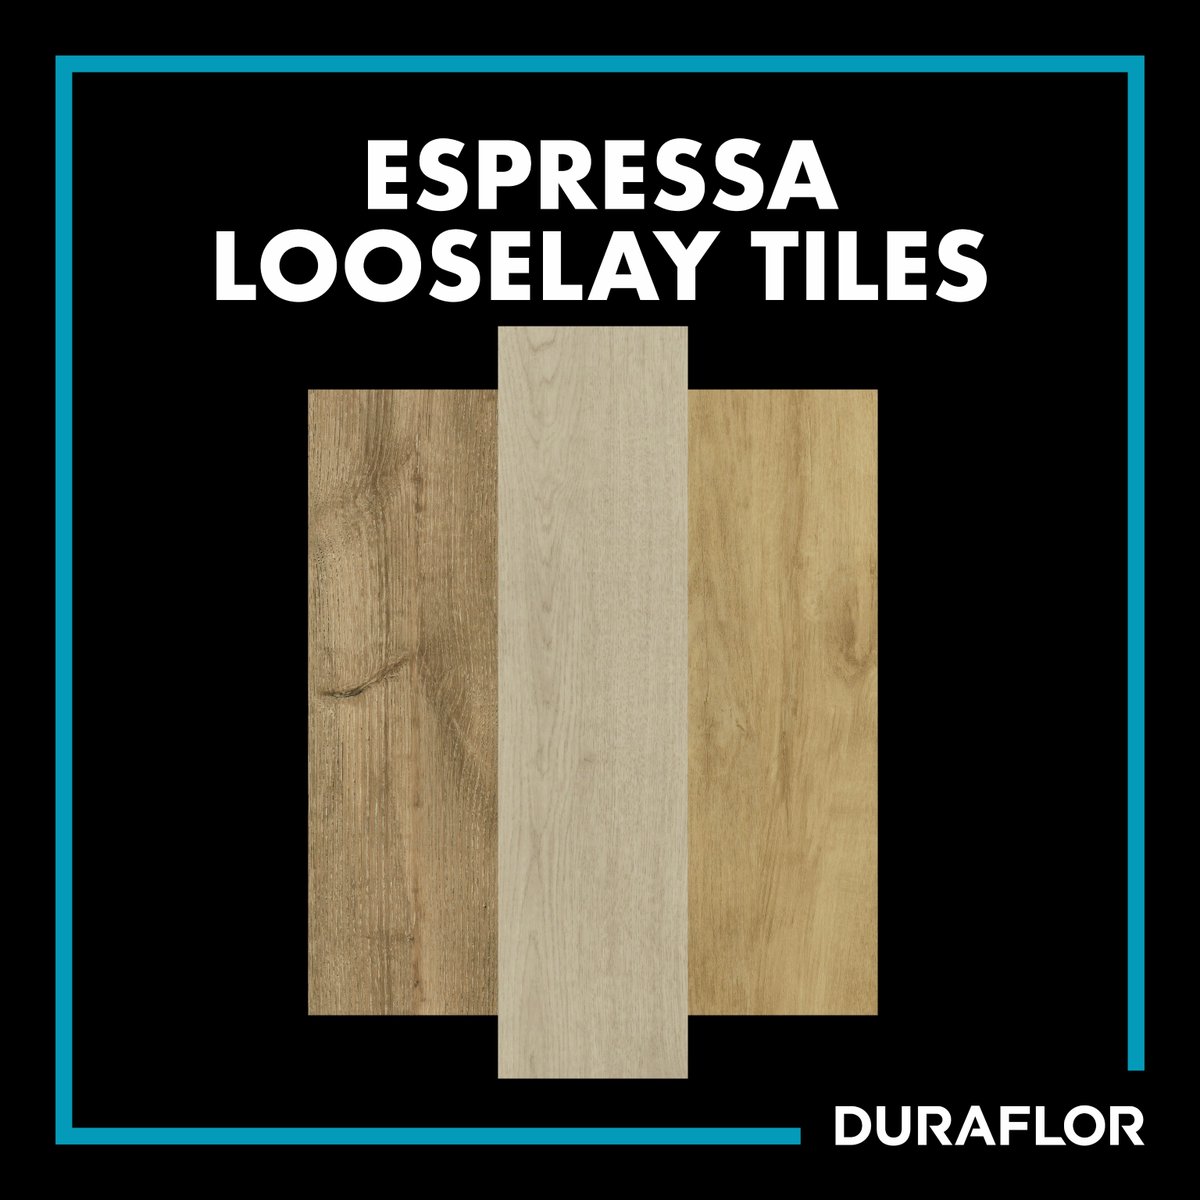 ESPRESSA is a range of loose lay tiles that replicates the attractive natural effects found in wood and stone. It is designed to enhance any interior. Learn more: ow.ly/RQ8650QssJs #Flooring